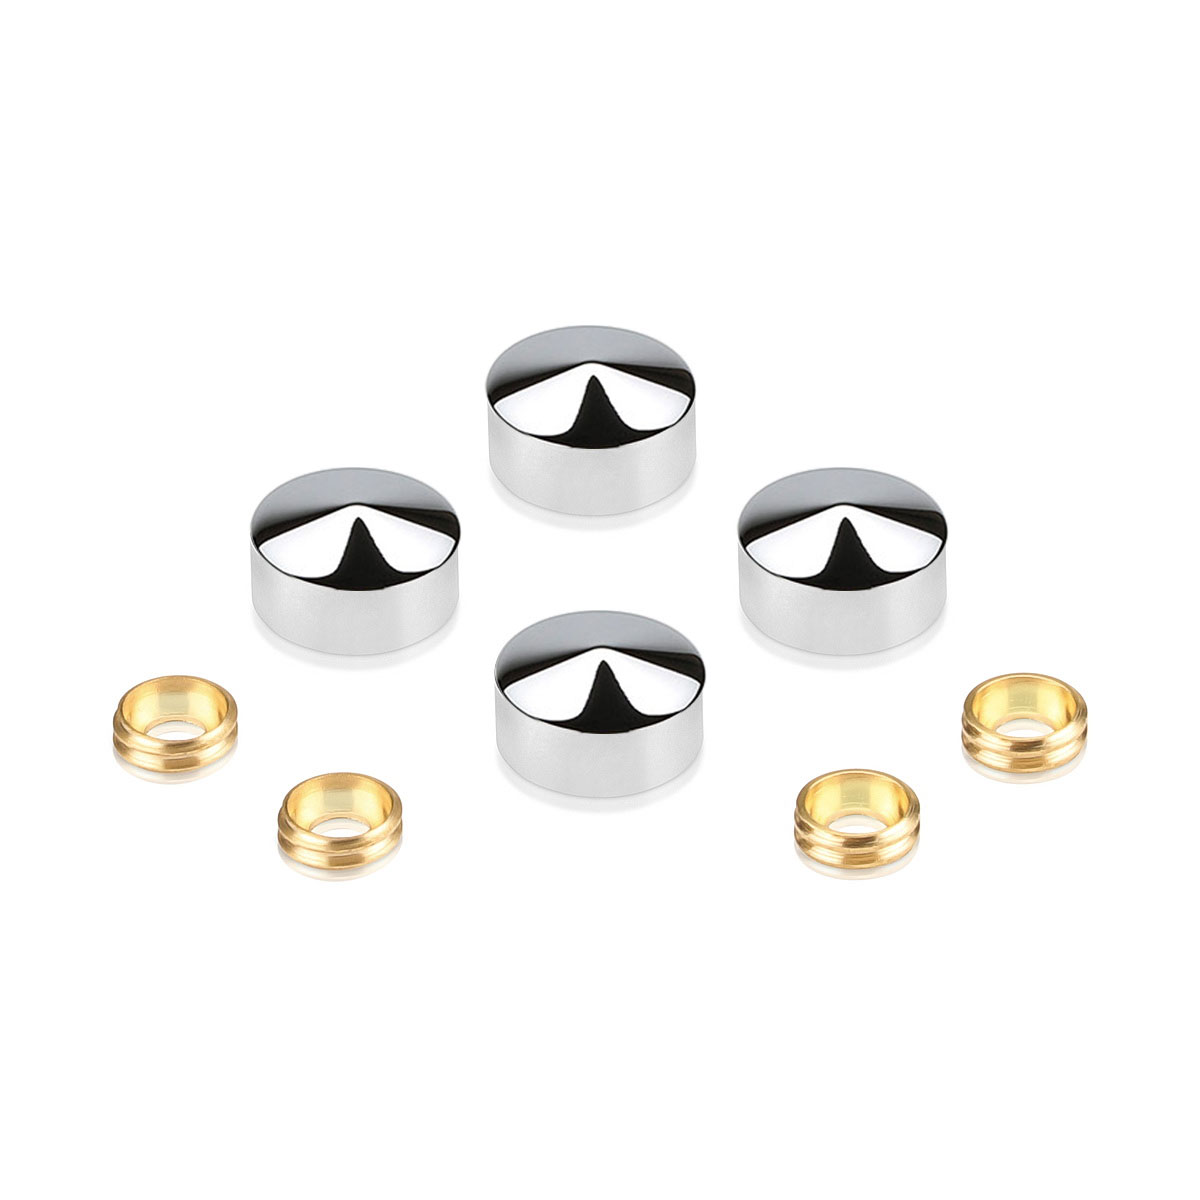 Set of Conical Screw Cover Diameter 5/8'', Polished Stainless Steel Finish (Indoor or Outdoor)